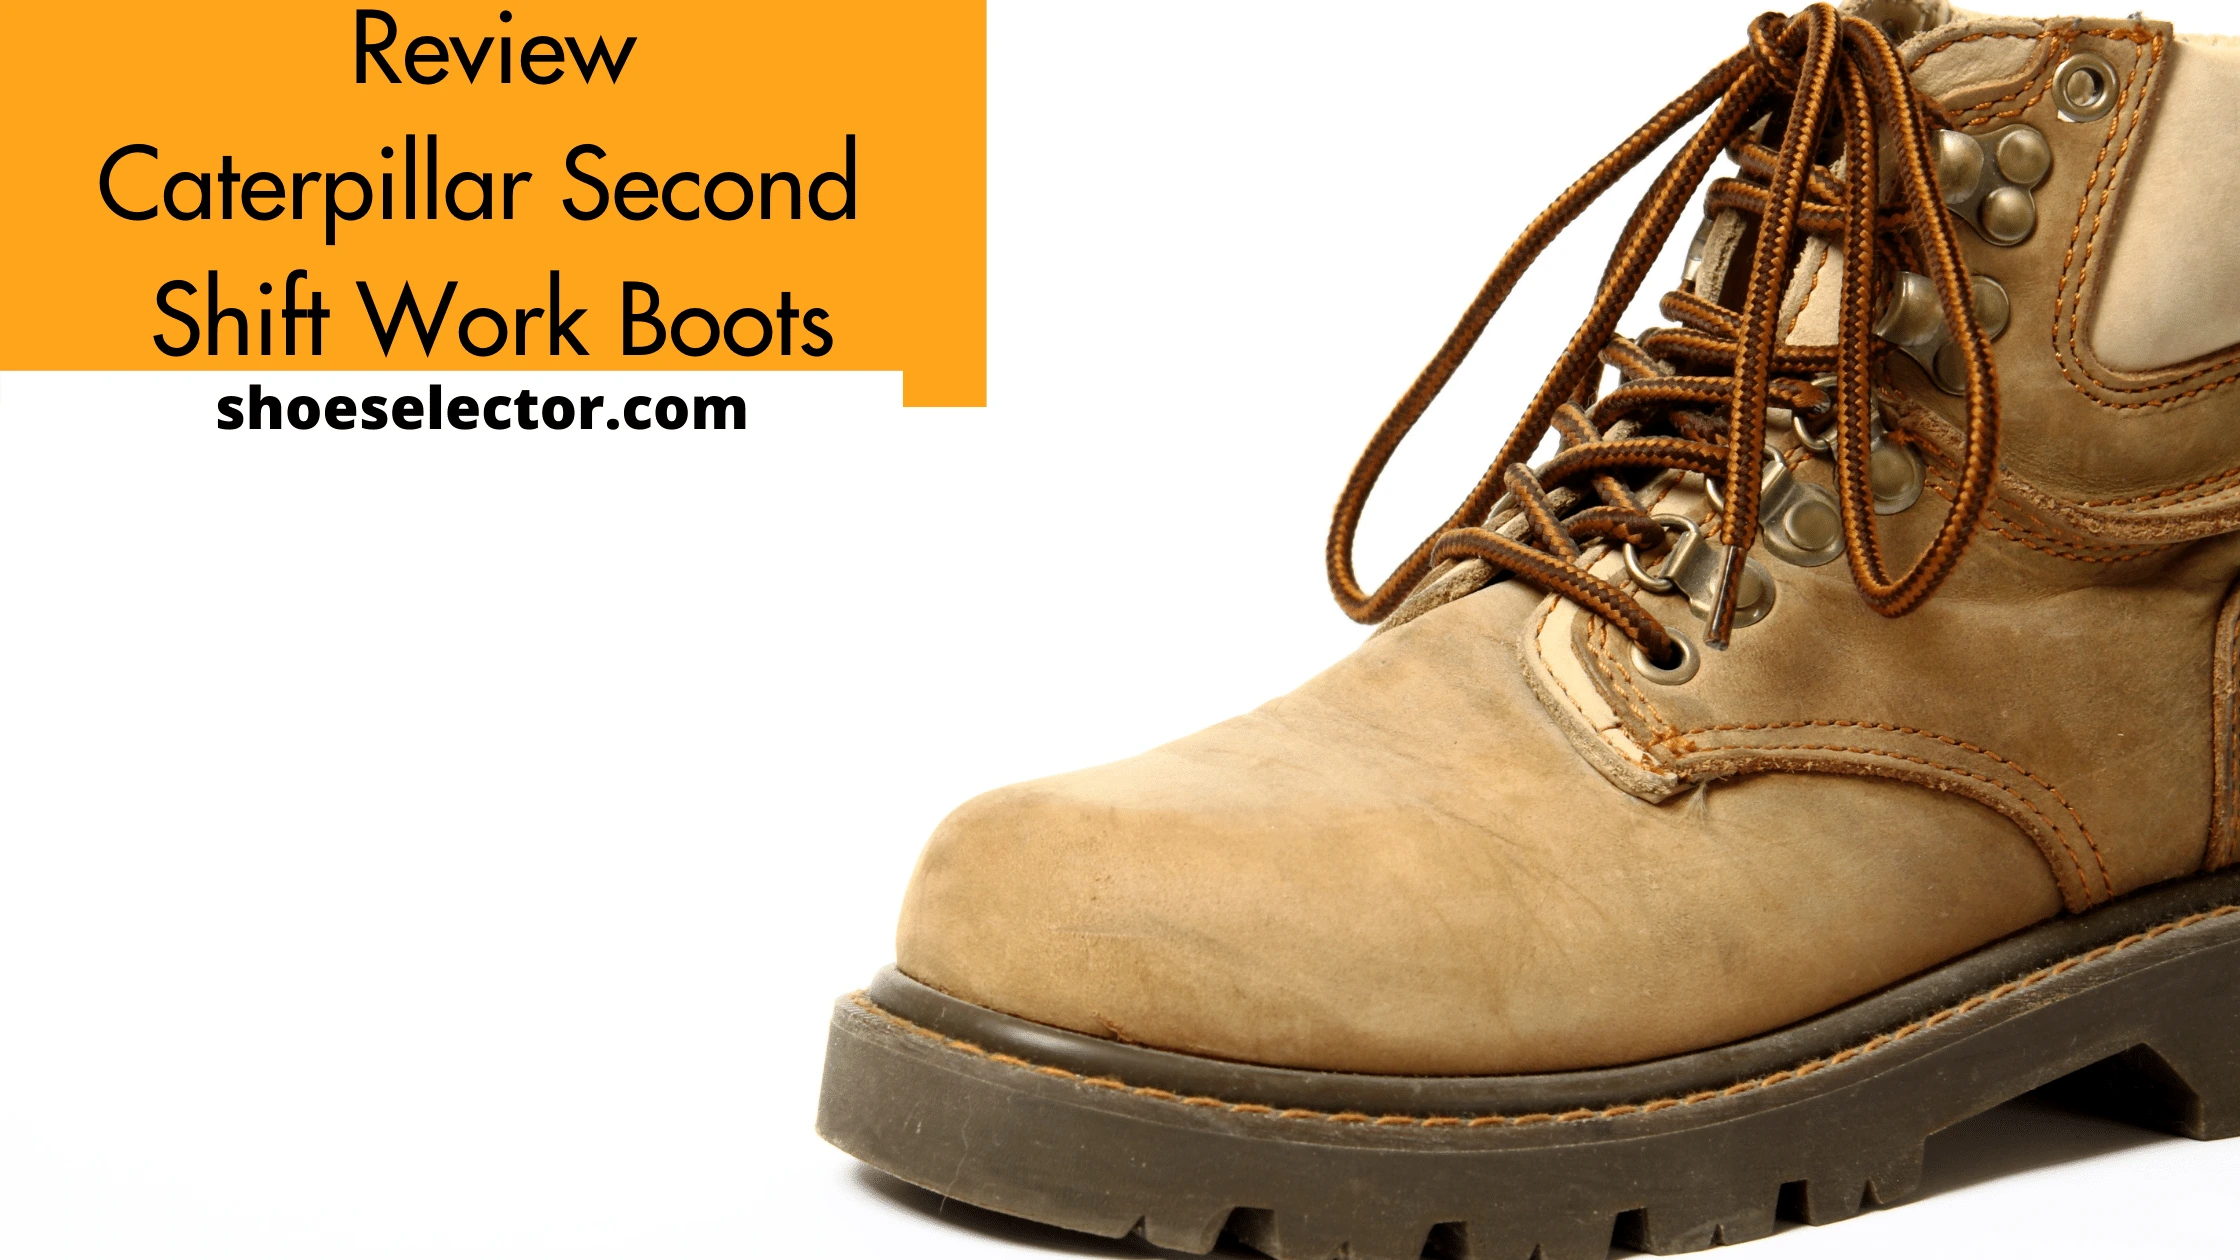 Caterpillar Second Shift Work Boots Review - Complete Guide